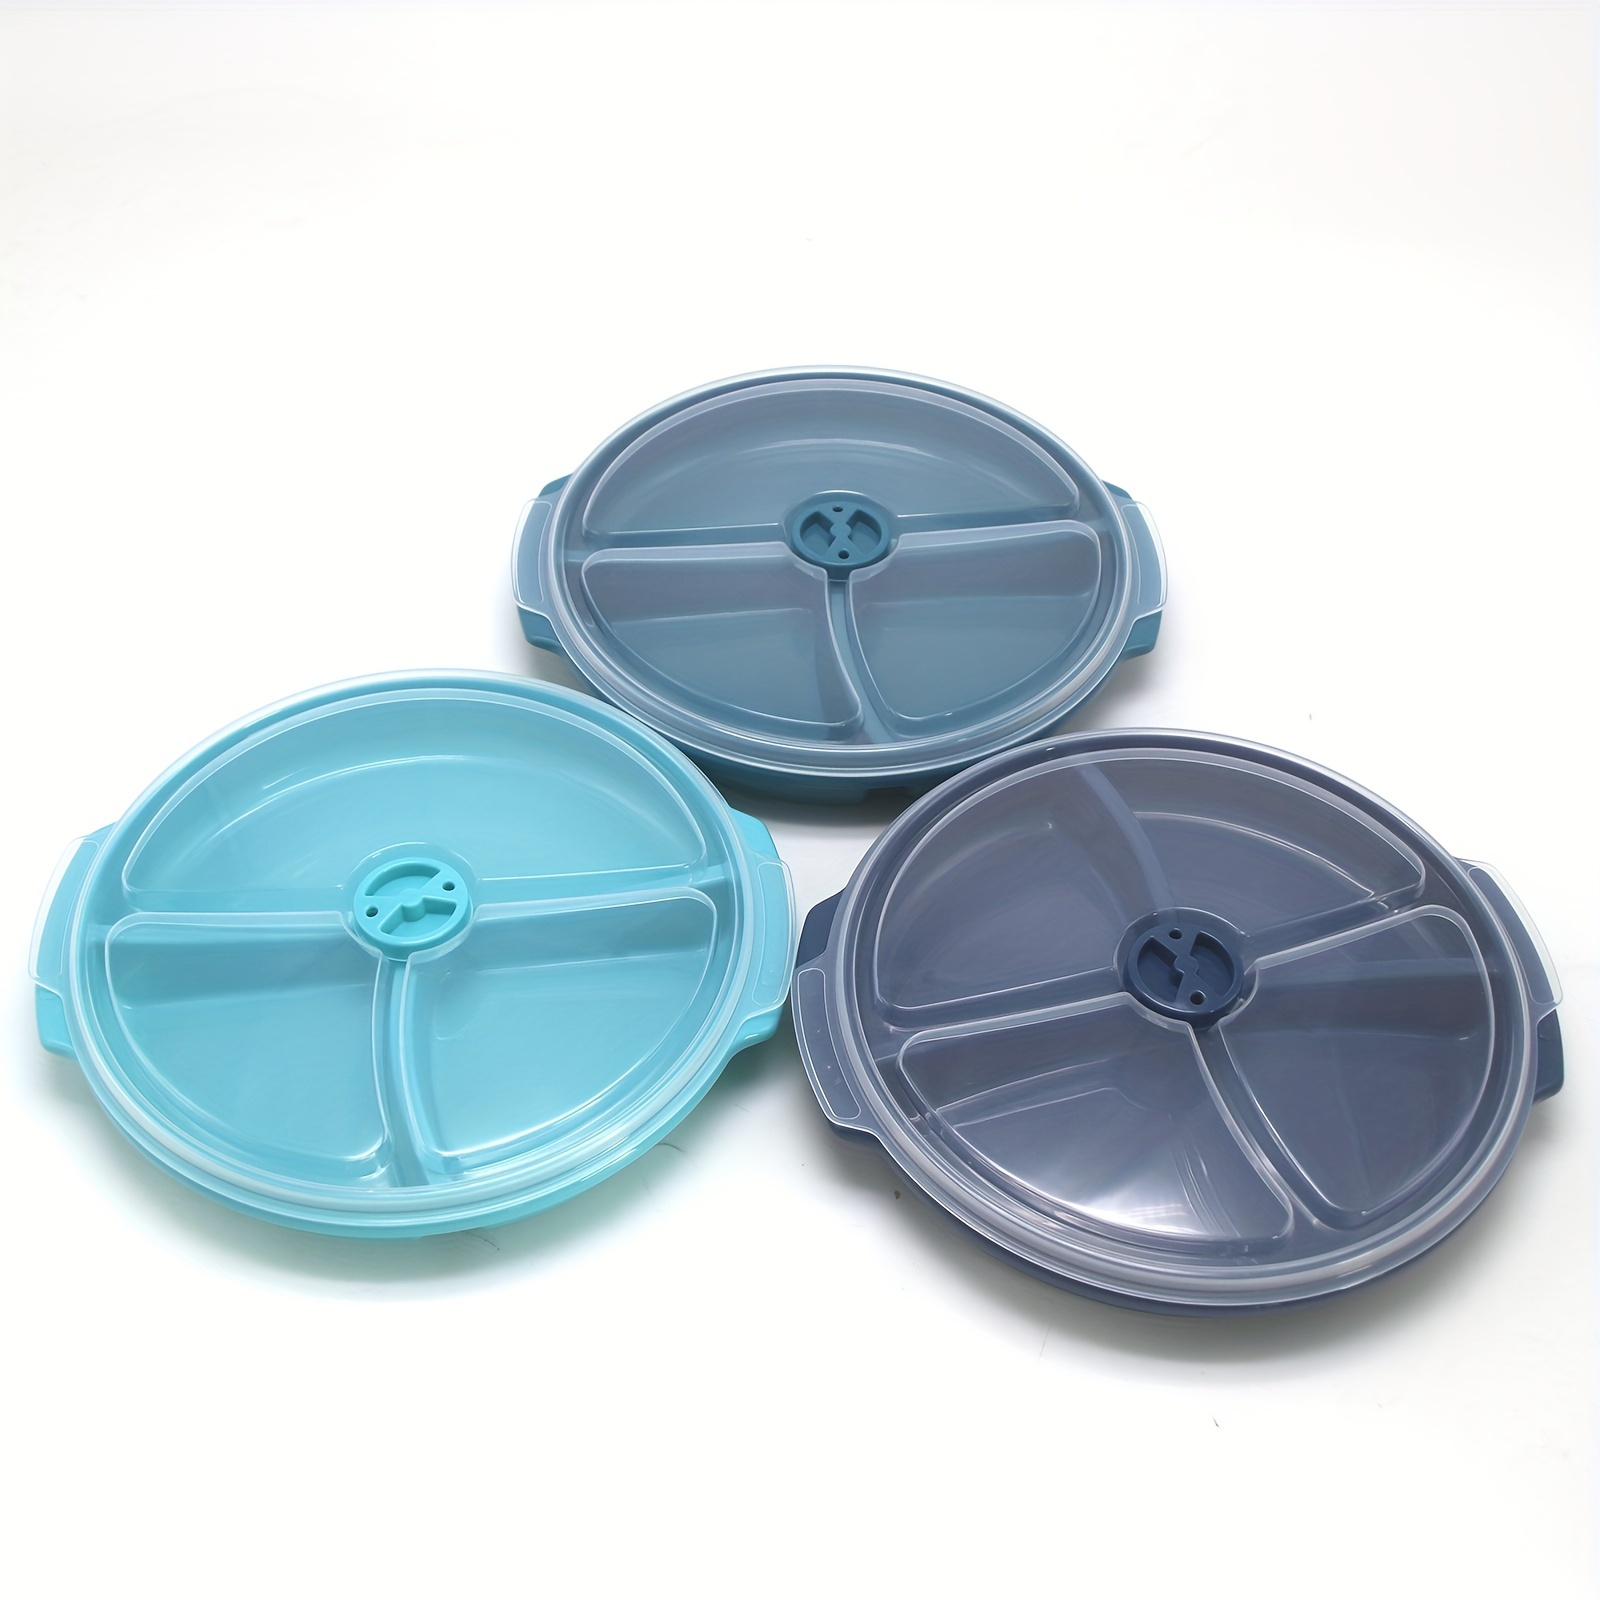 reusable round bento box divided plates lid perfect healthy